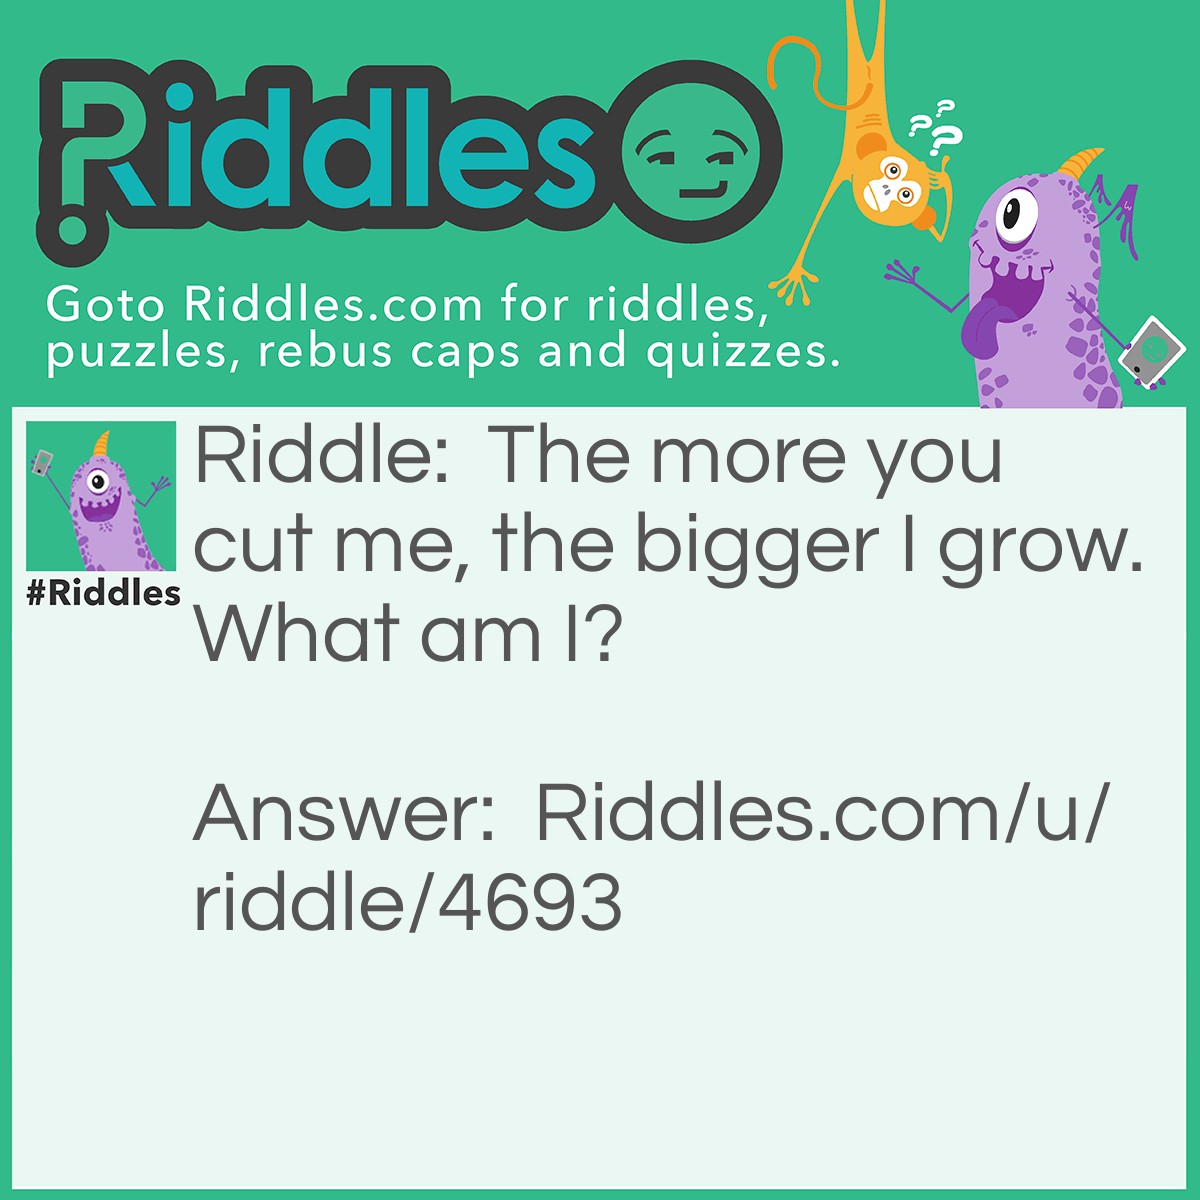 Riddle: The more you cut me, the bigger I grow. What am I? Answer: A hole.